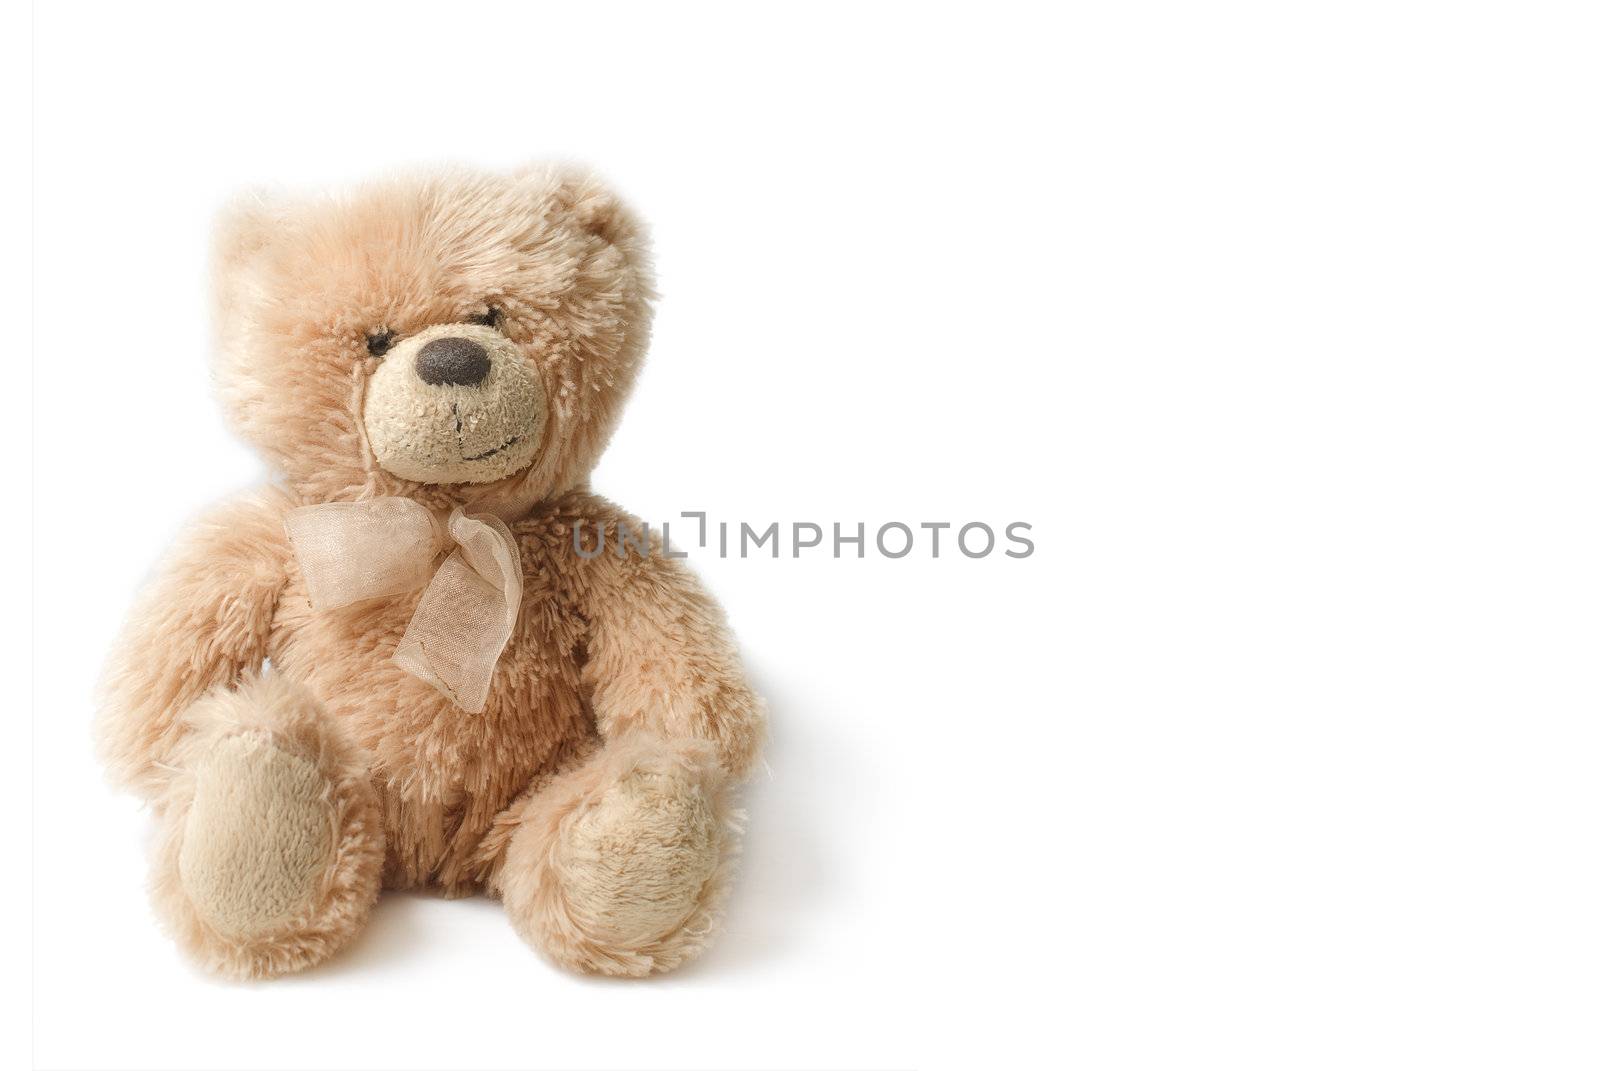 Old small teddie bear isolated on white background